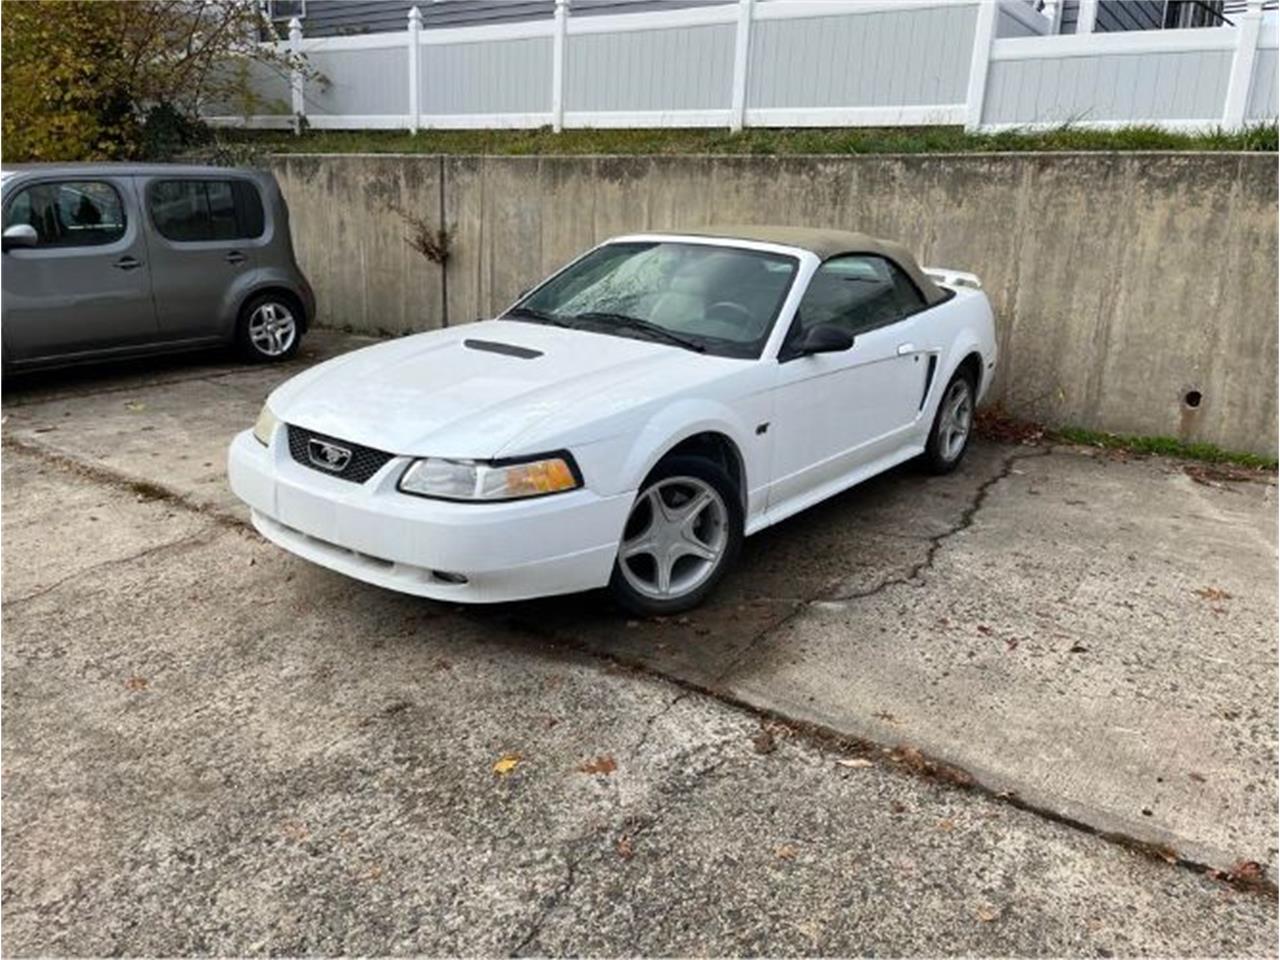 For Sale: 2000 Ford Mustang in Cadillac, Michigan for sale in Cadillac, MI